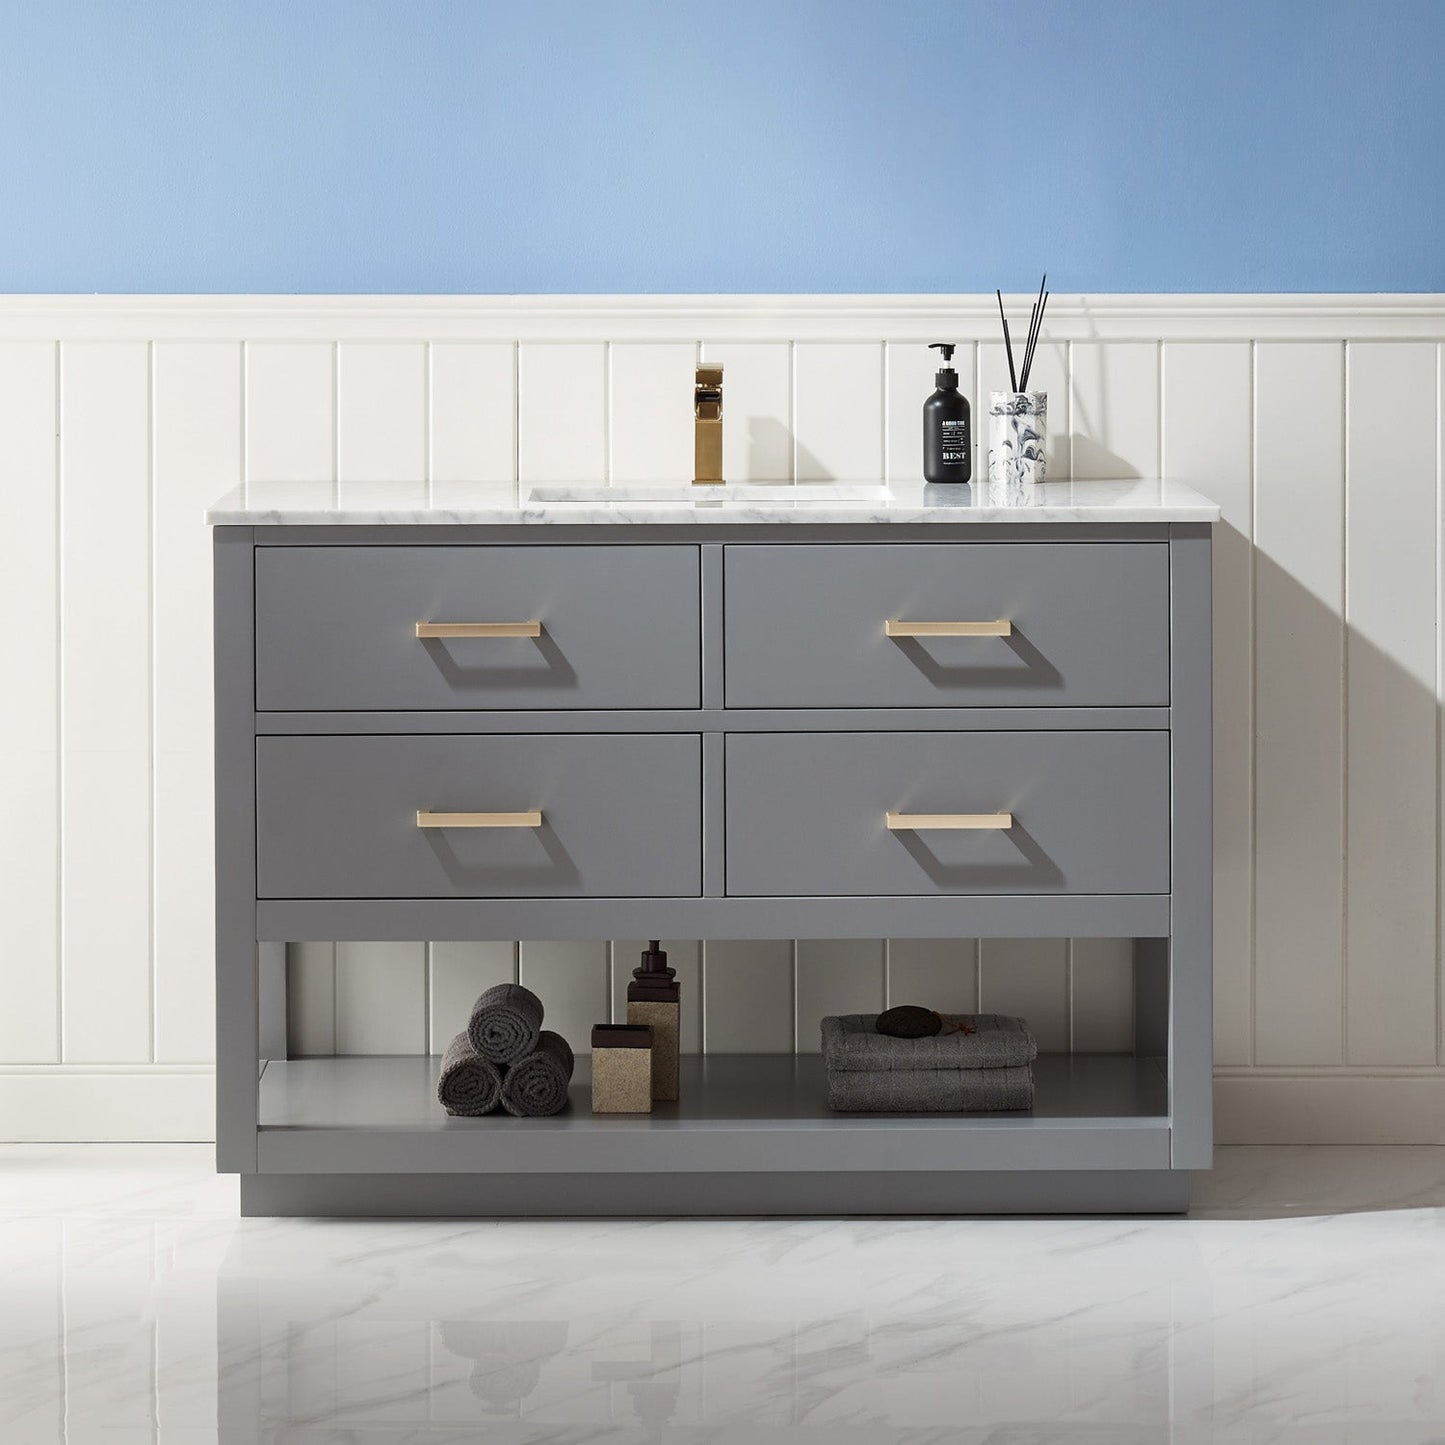 Remi 48" Single Bathroom Vanity Set in Gray and Carrara White Marble Countertop without Mirror